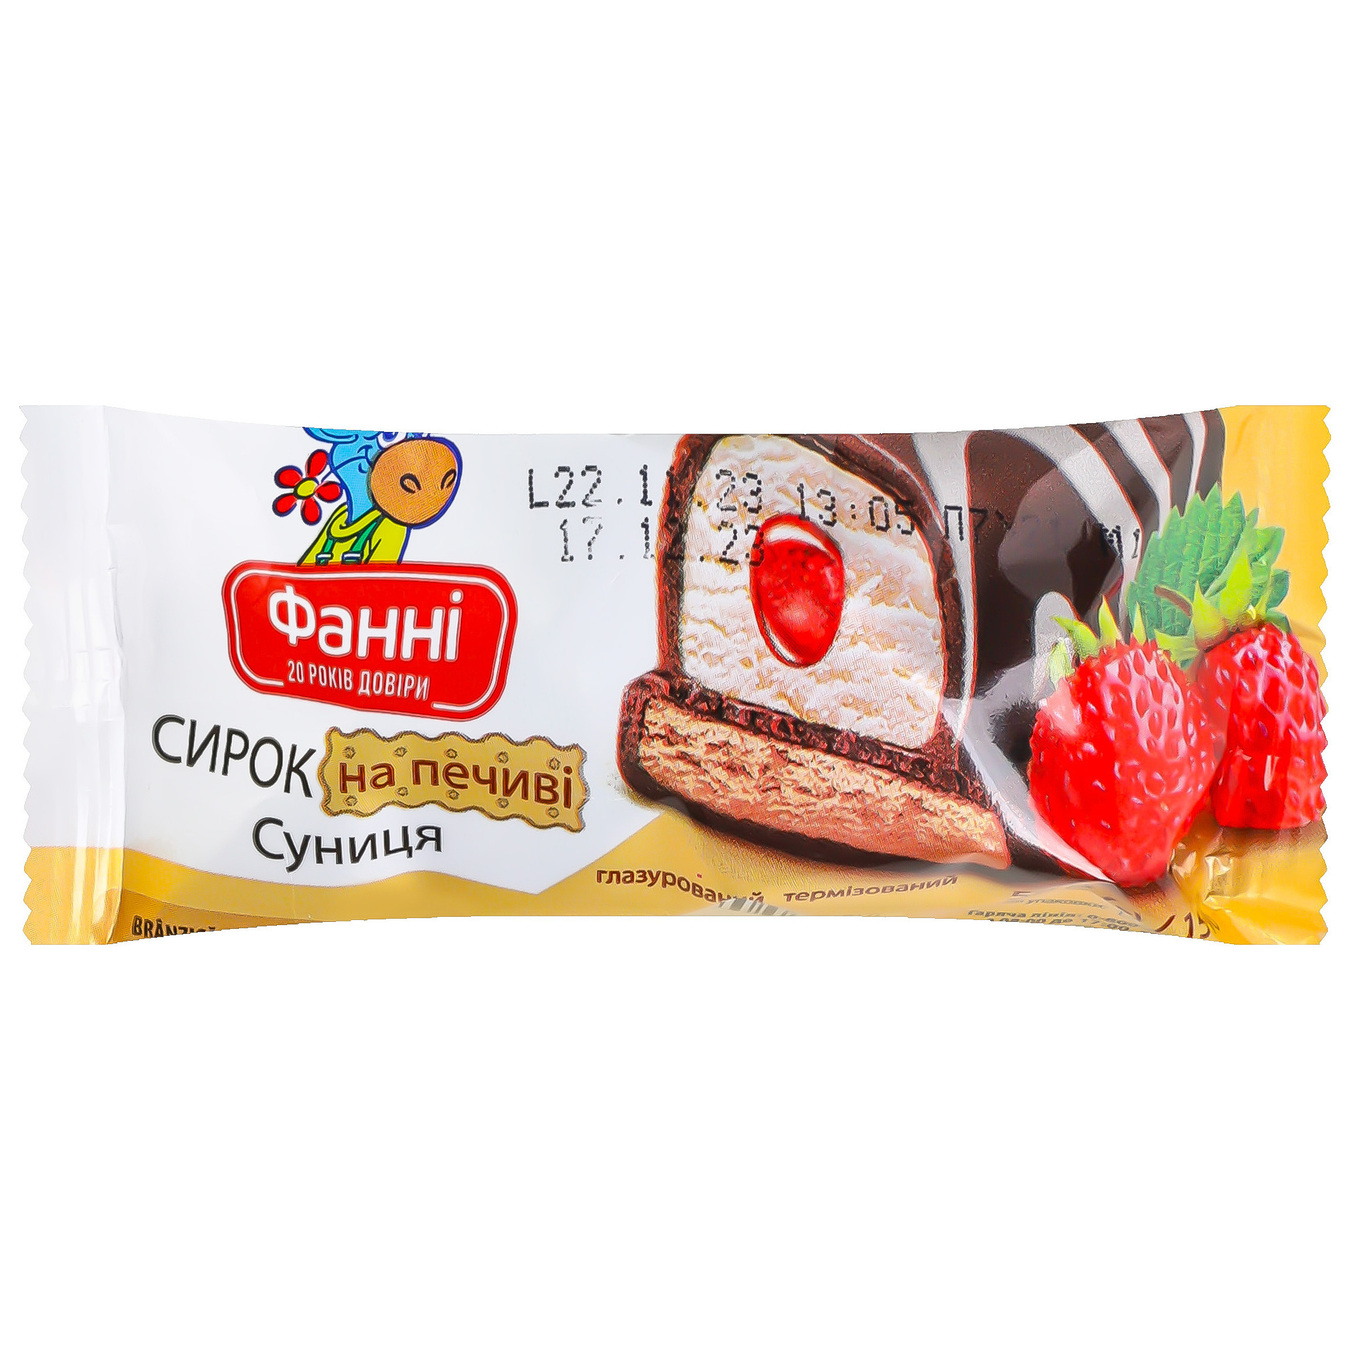 Fanni Glazed Curd Snack with Wild Strawberry Filling on a Cookie 15% 50g